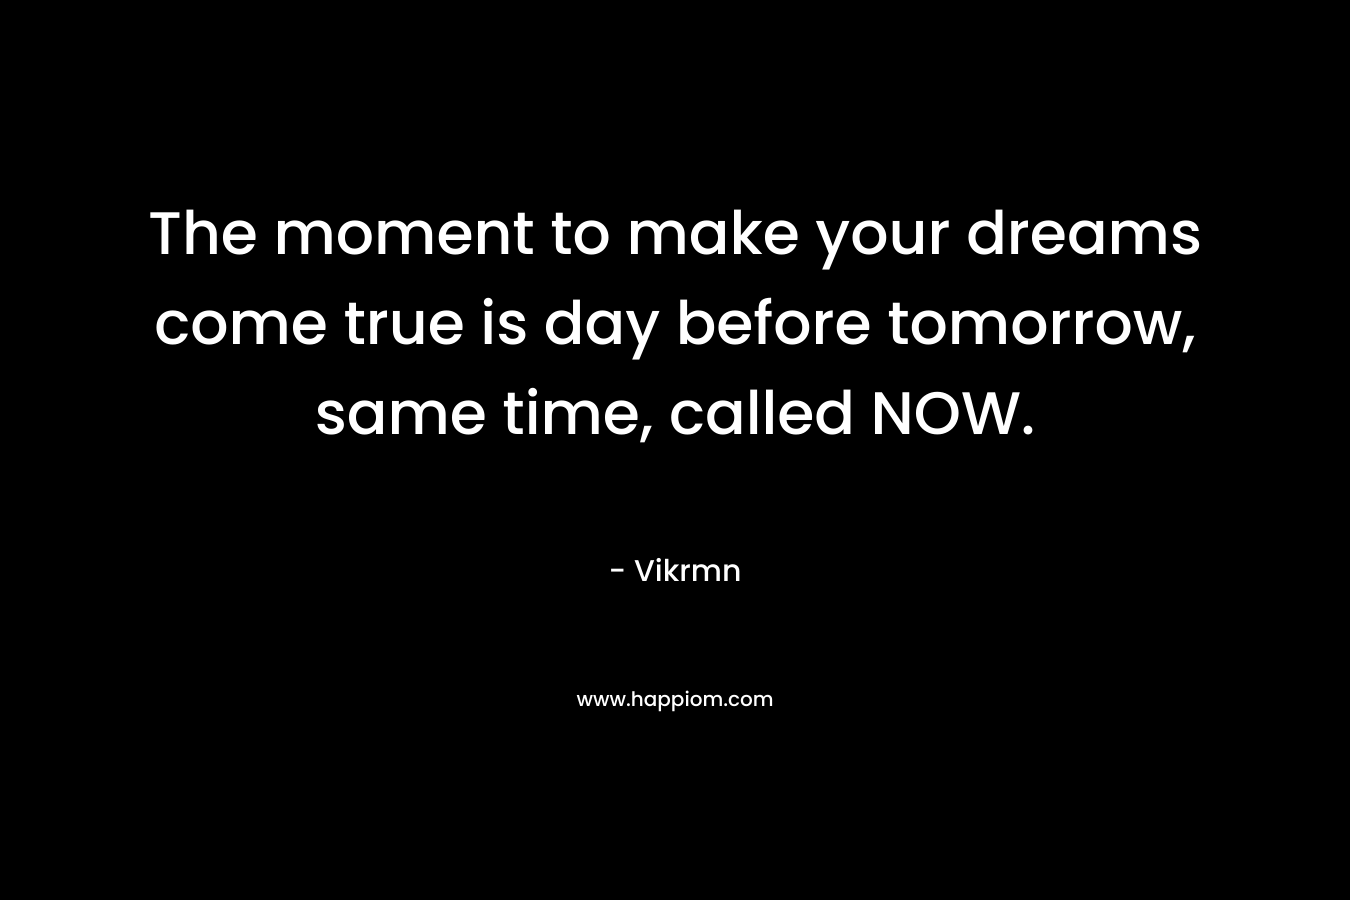 The moment to make your dreams come true is day before tomorrow, same time, called NOW.